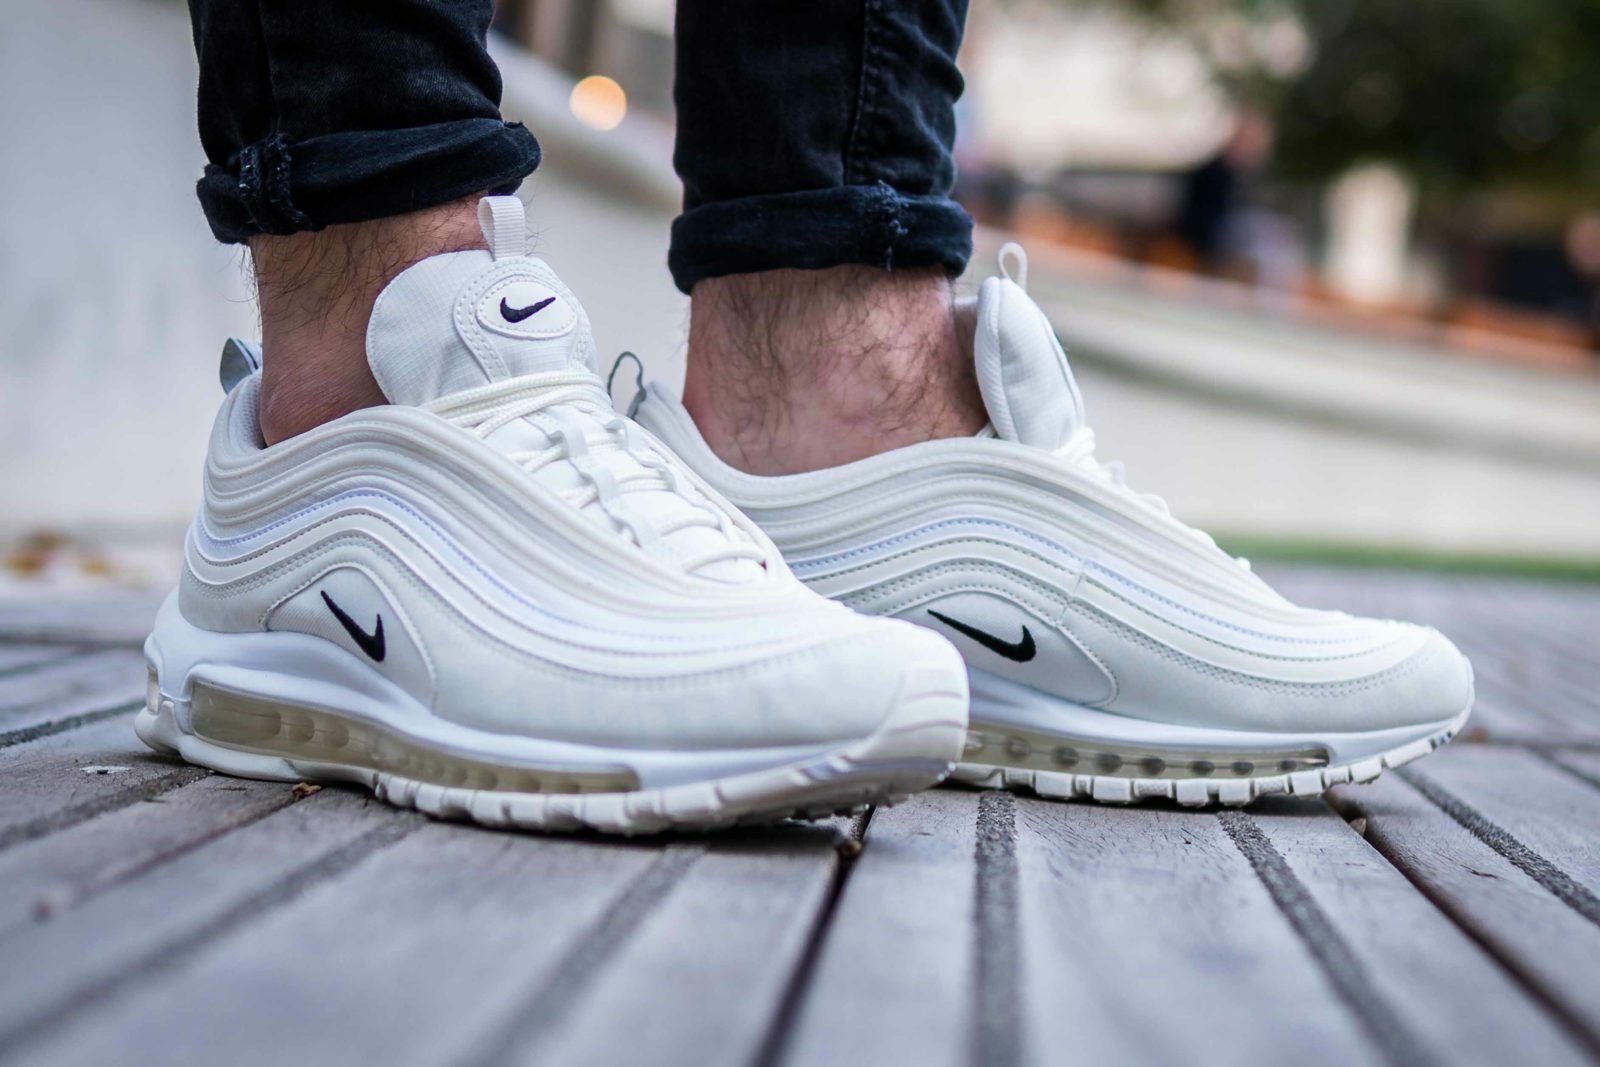 Freshen Up Your Look This Year: Why the Nike Air Max 97 White Platinum Is a Must-Have Sneaker